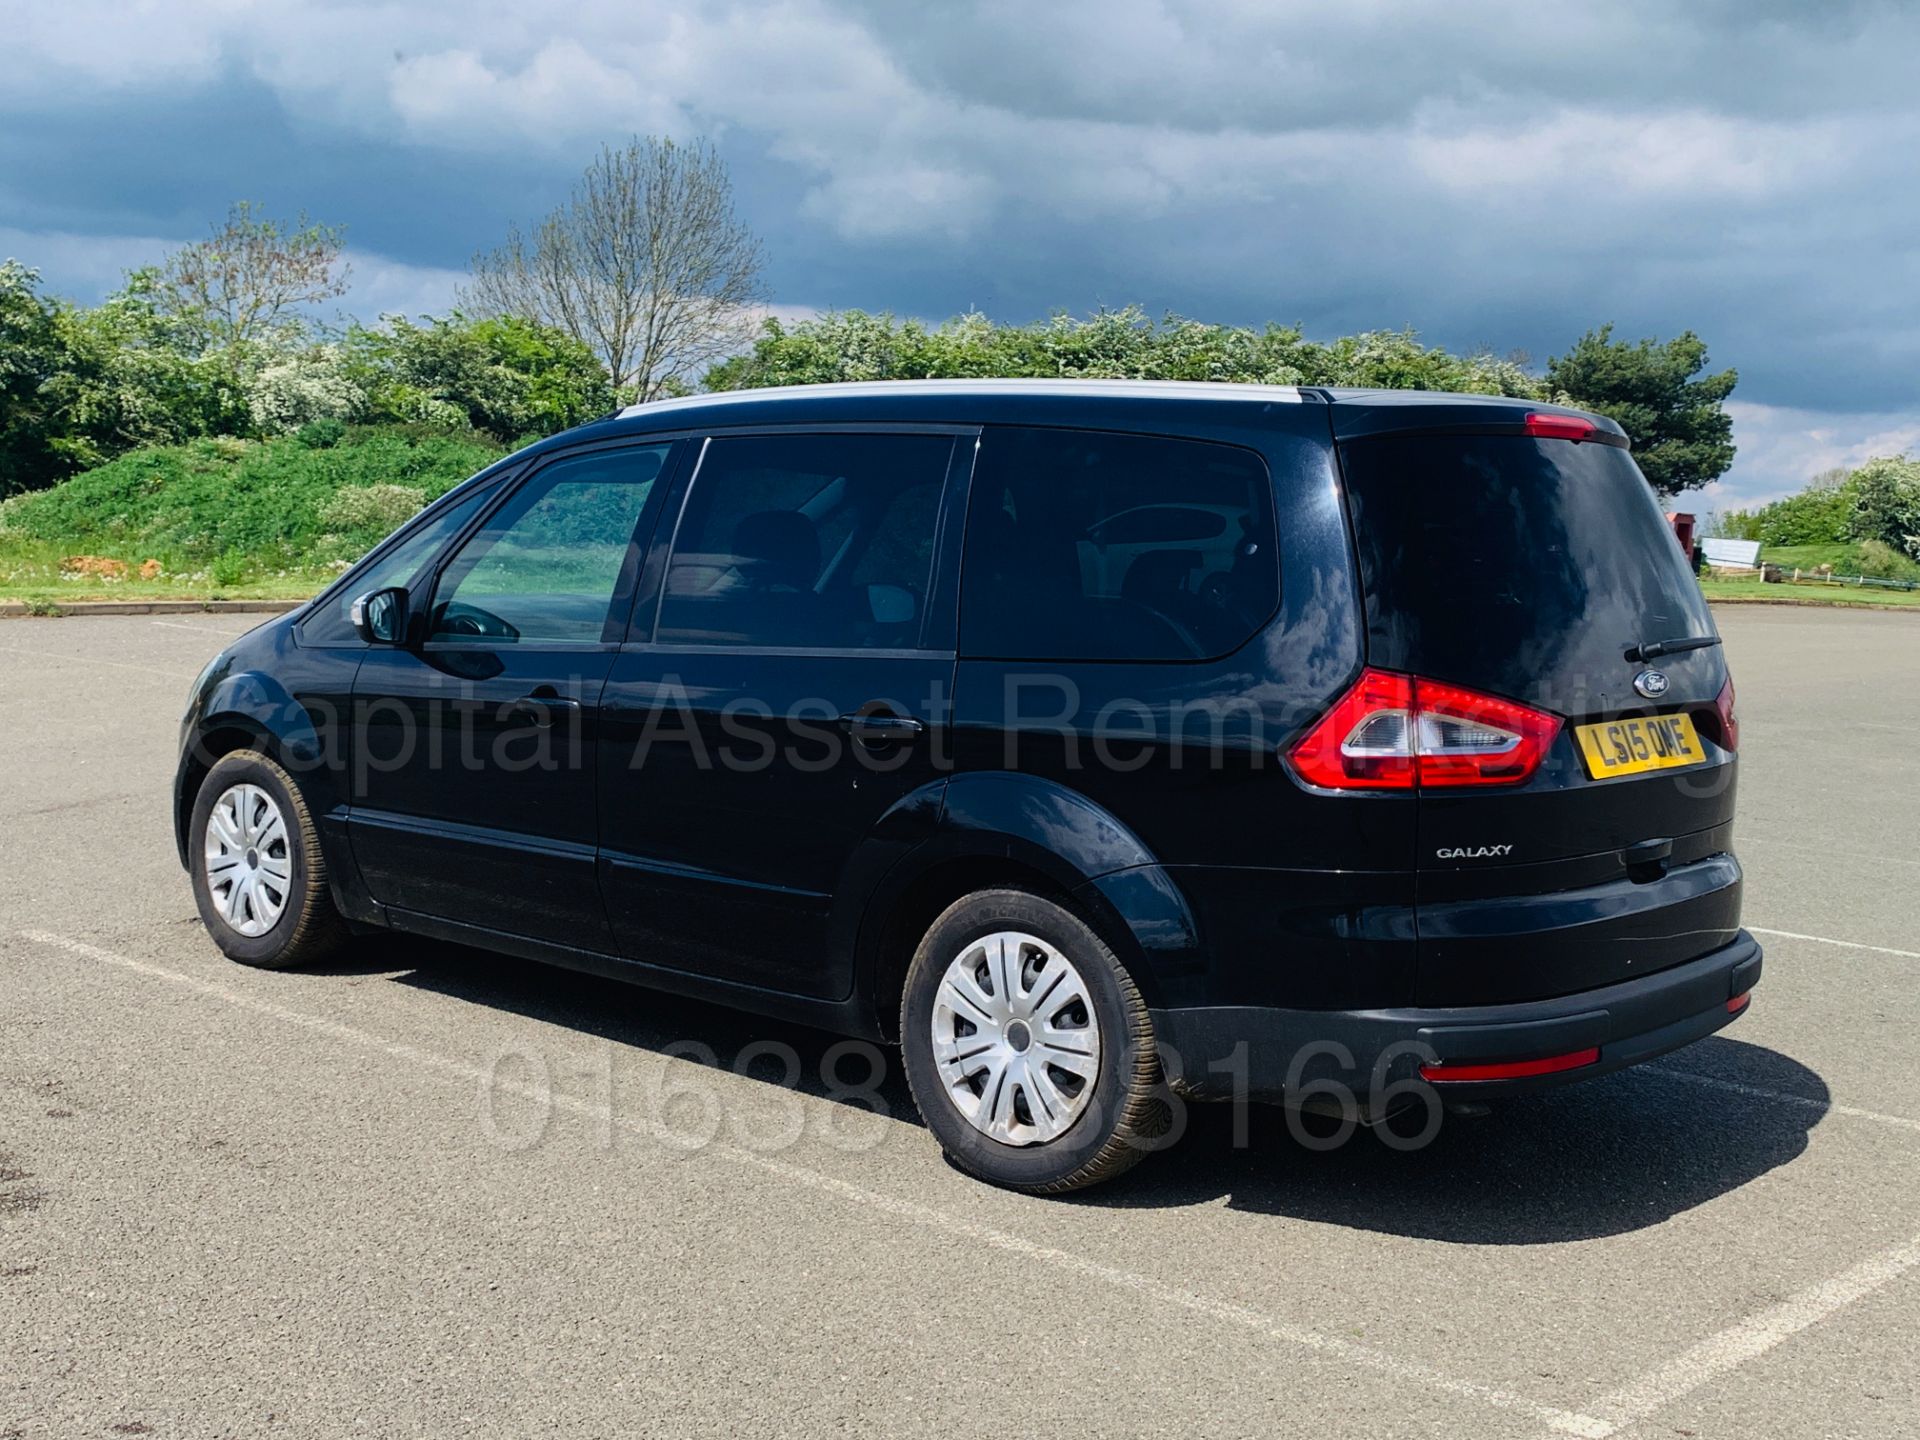 (On Sale) FORD GALAXY *ZETEC* 7 SEATER MPV (2015) '2.0 TDCI - 140 BHP - POWER SHIFT' (1 OWNER) - Image 4 of 37